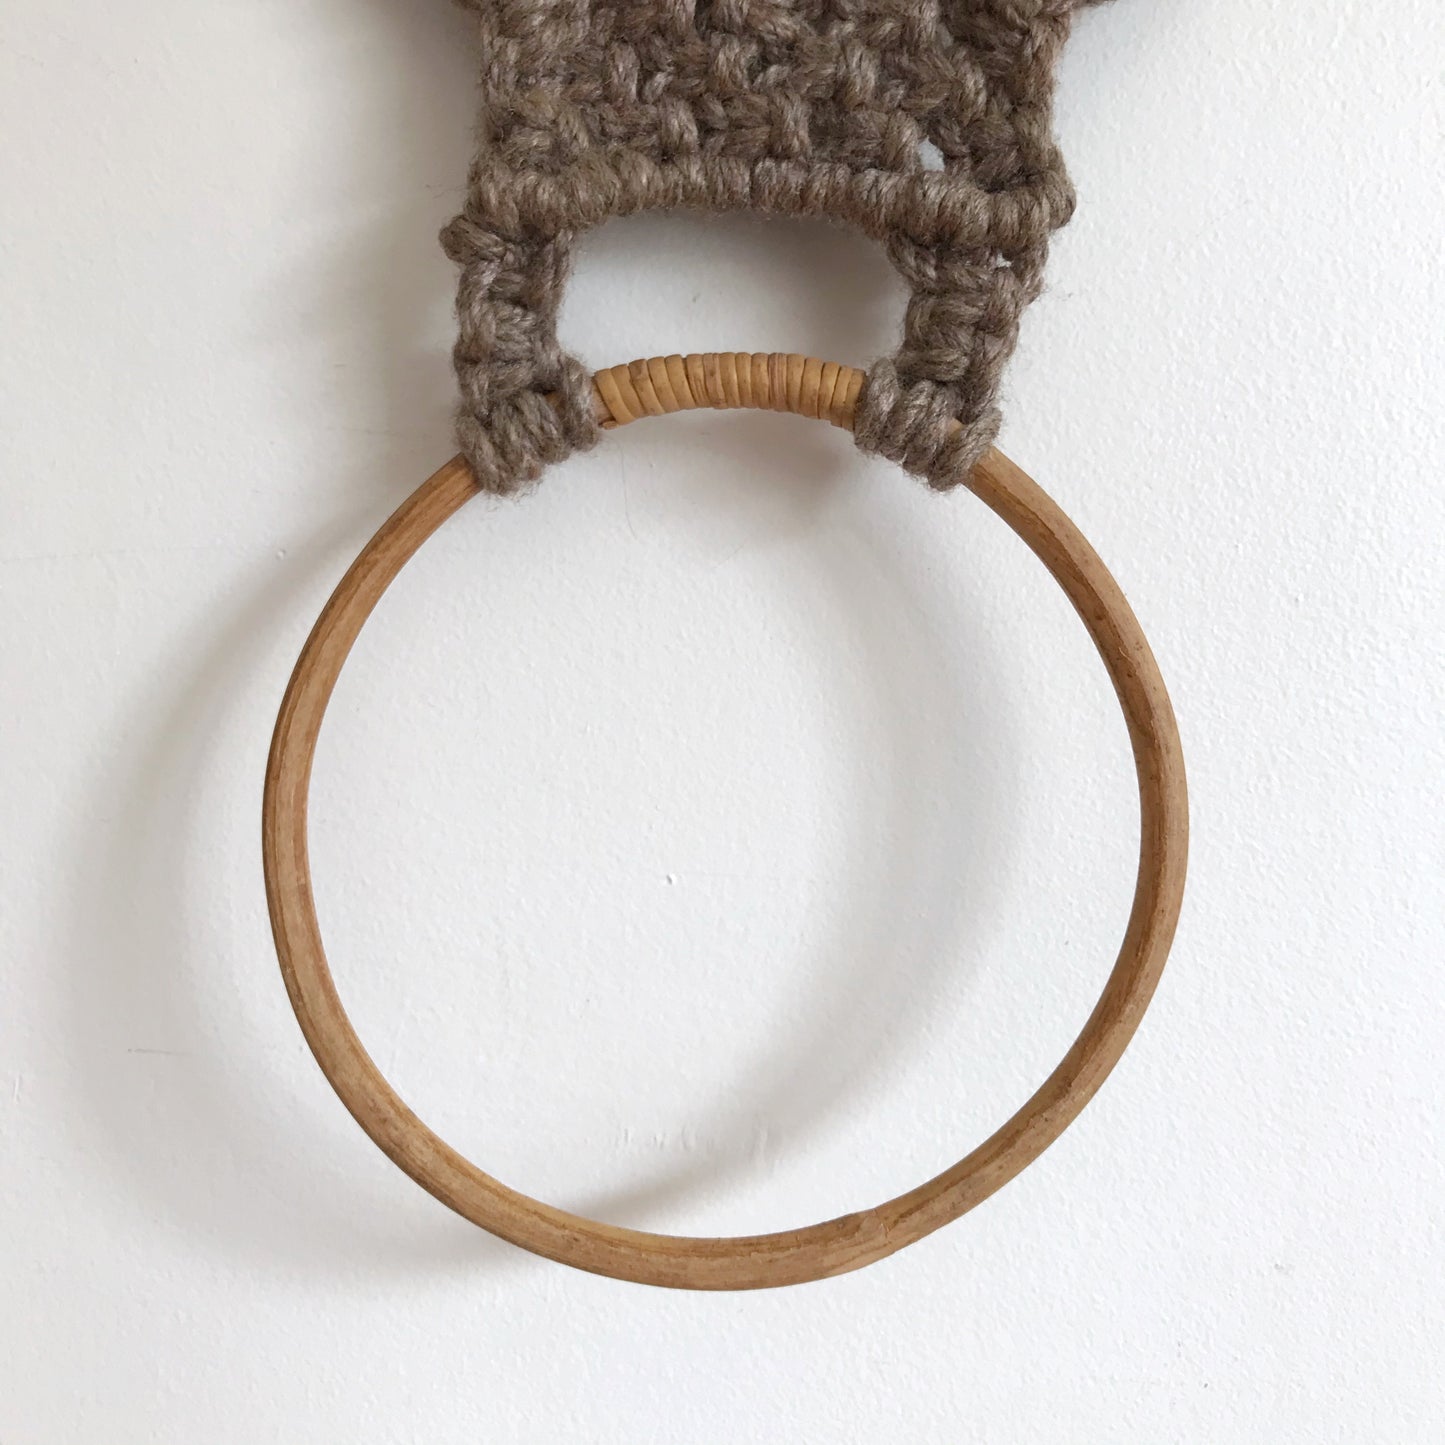 Vintage Hand-Woven Owl Towel Ring